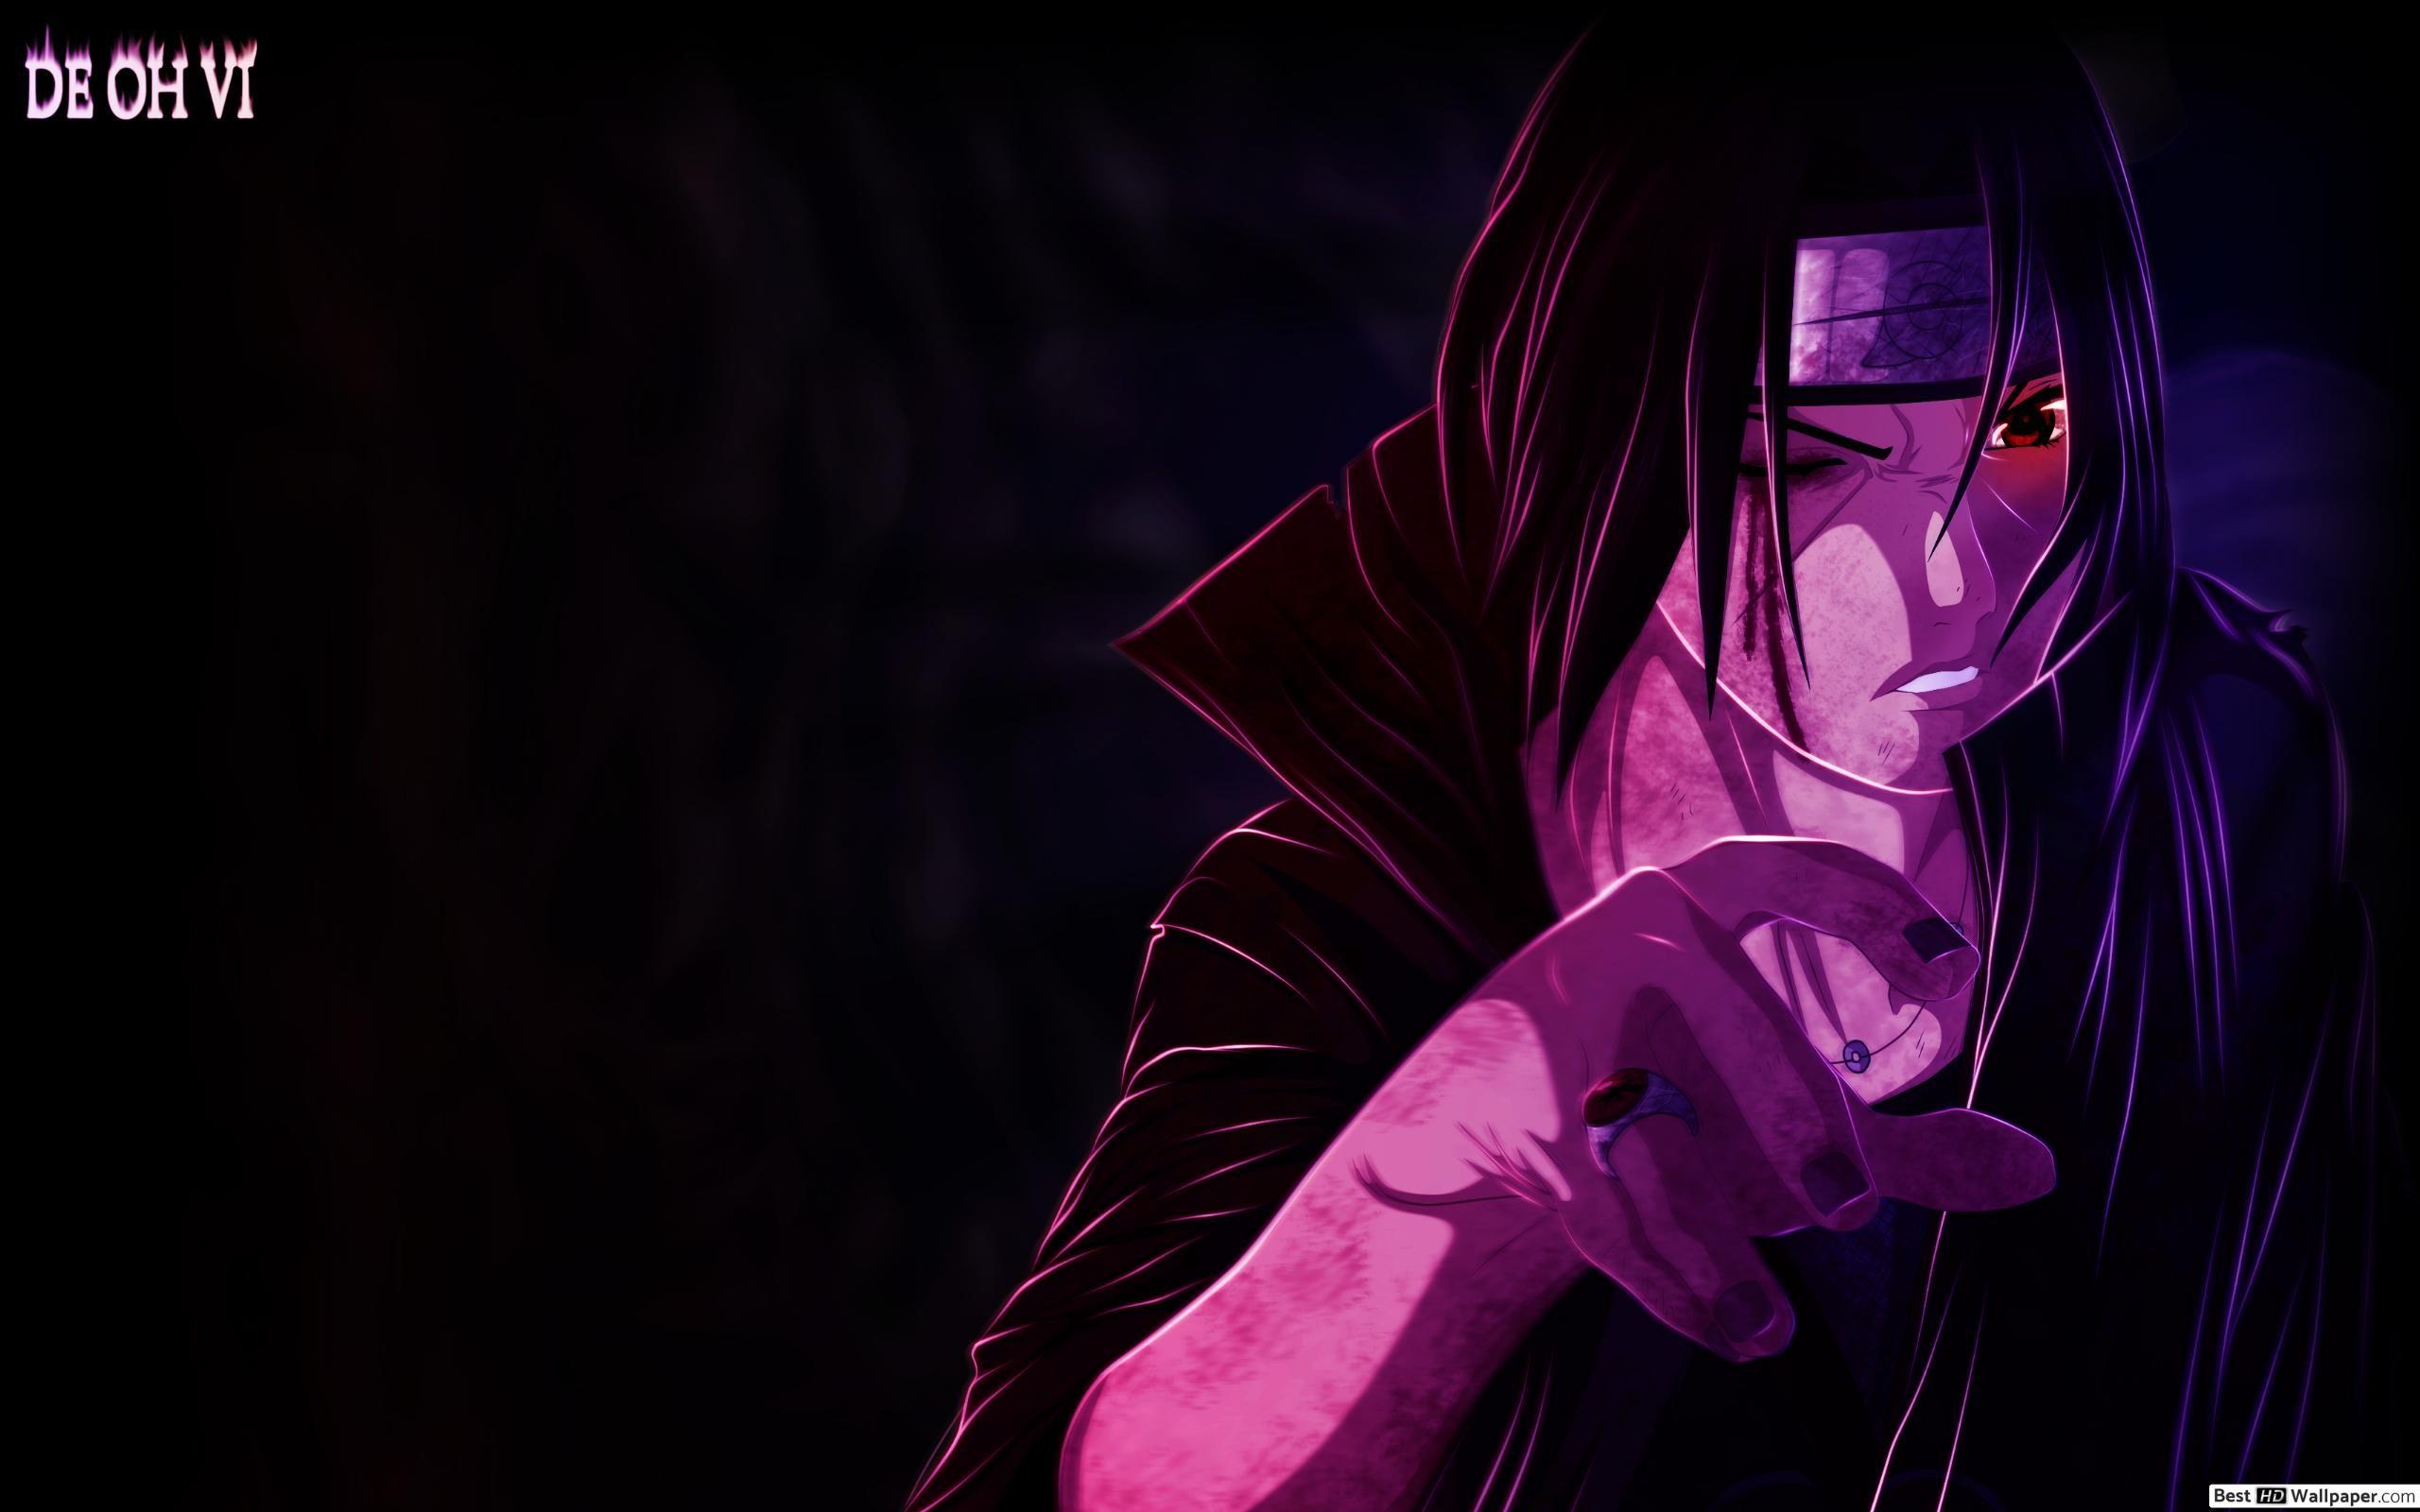 Itachi Uchiha Sharingan Wallpapers Top Free Itachi Uchiha Sharingan Backgrounds Wallpaperaccess Here you can find the best itachi wallpapers uploaded by our community. itachi uchiha sharingan wallpapers